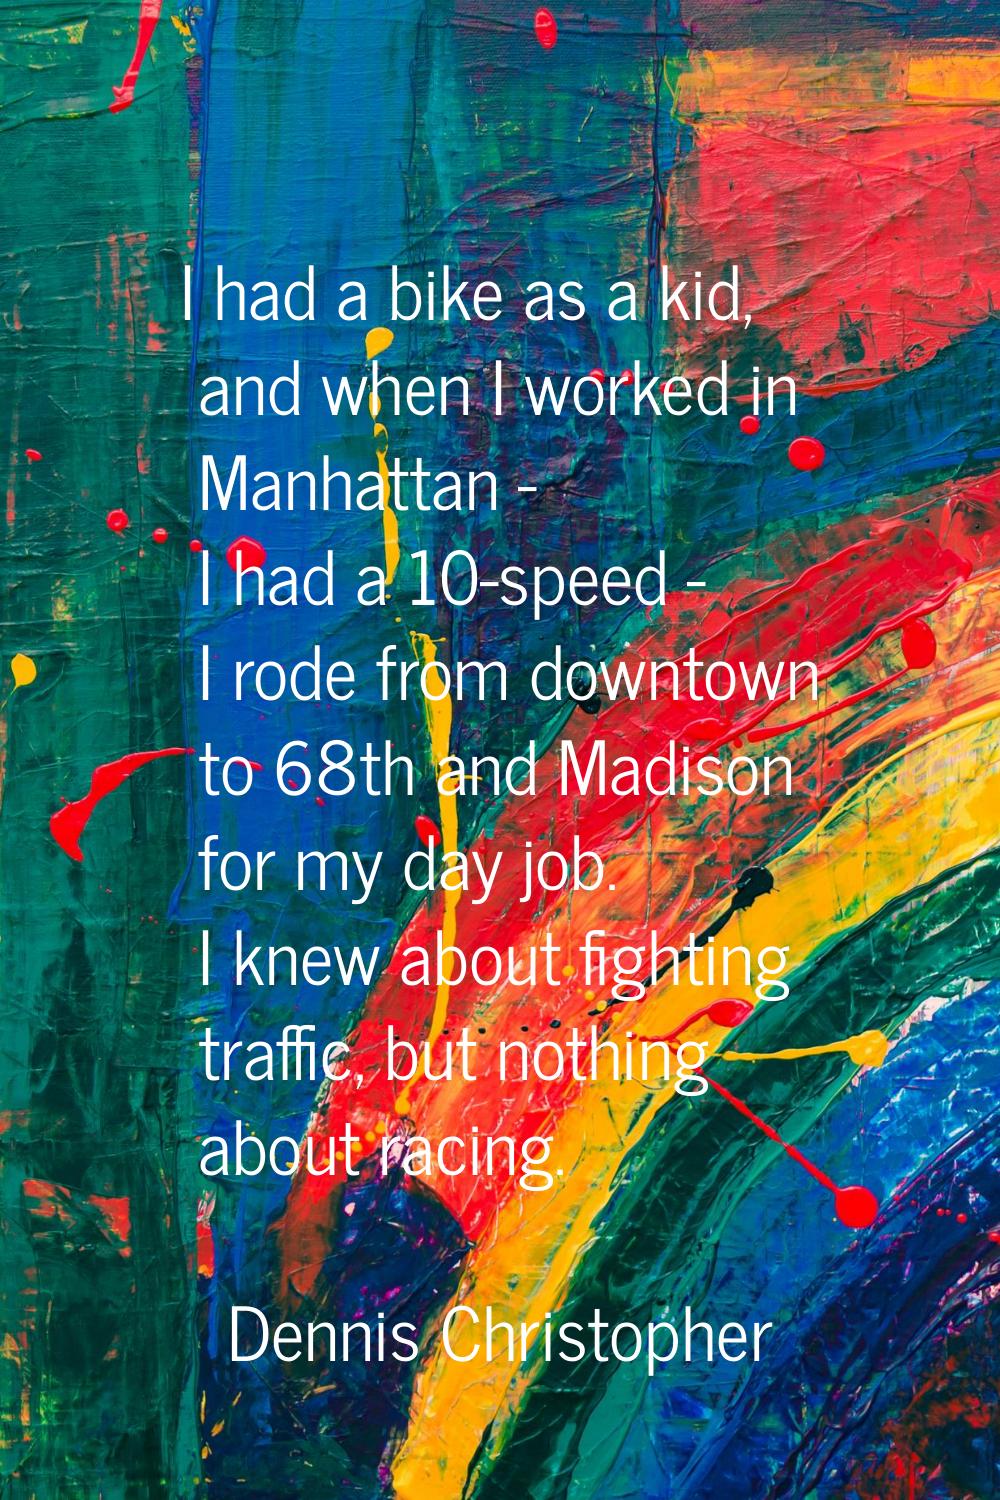 I had a bike as a kid, and when I worked in Manhattan - I had a 10-speed - I rode from downtown to 